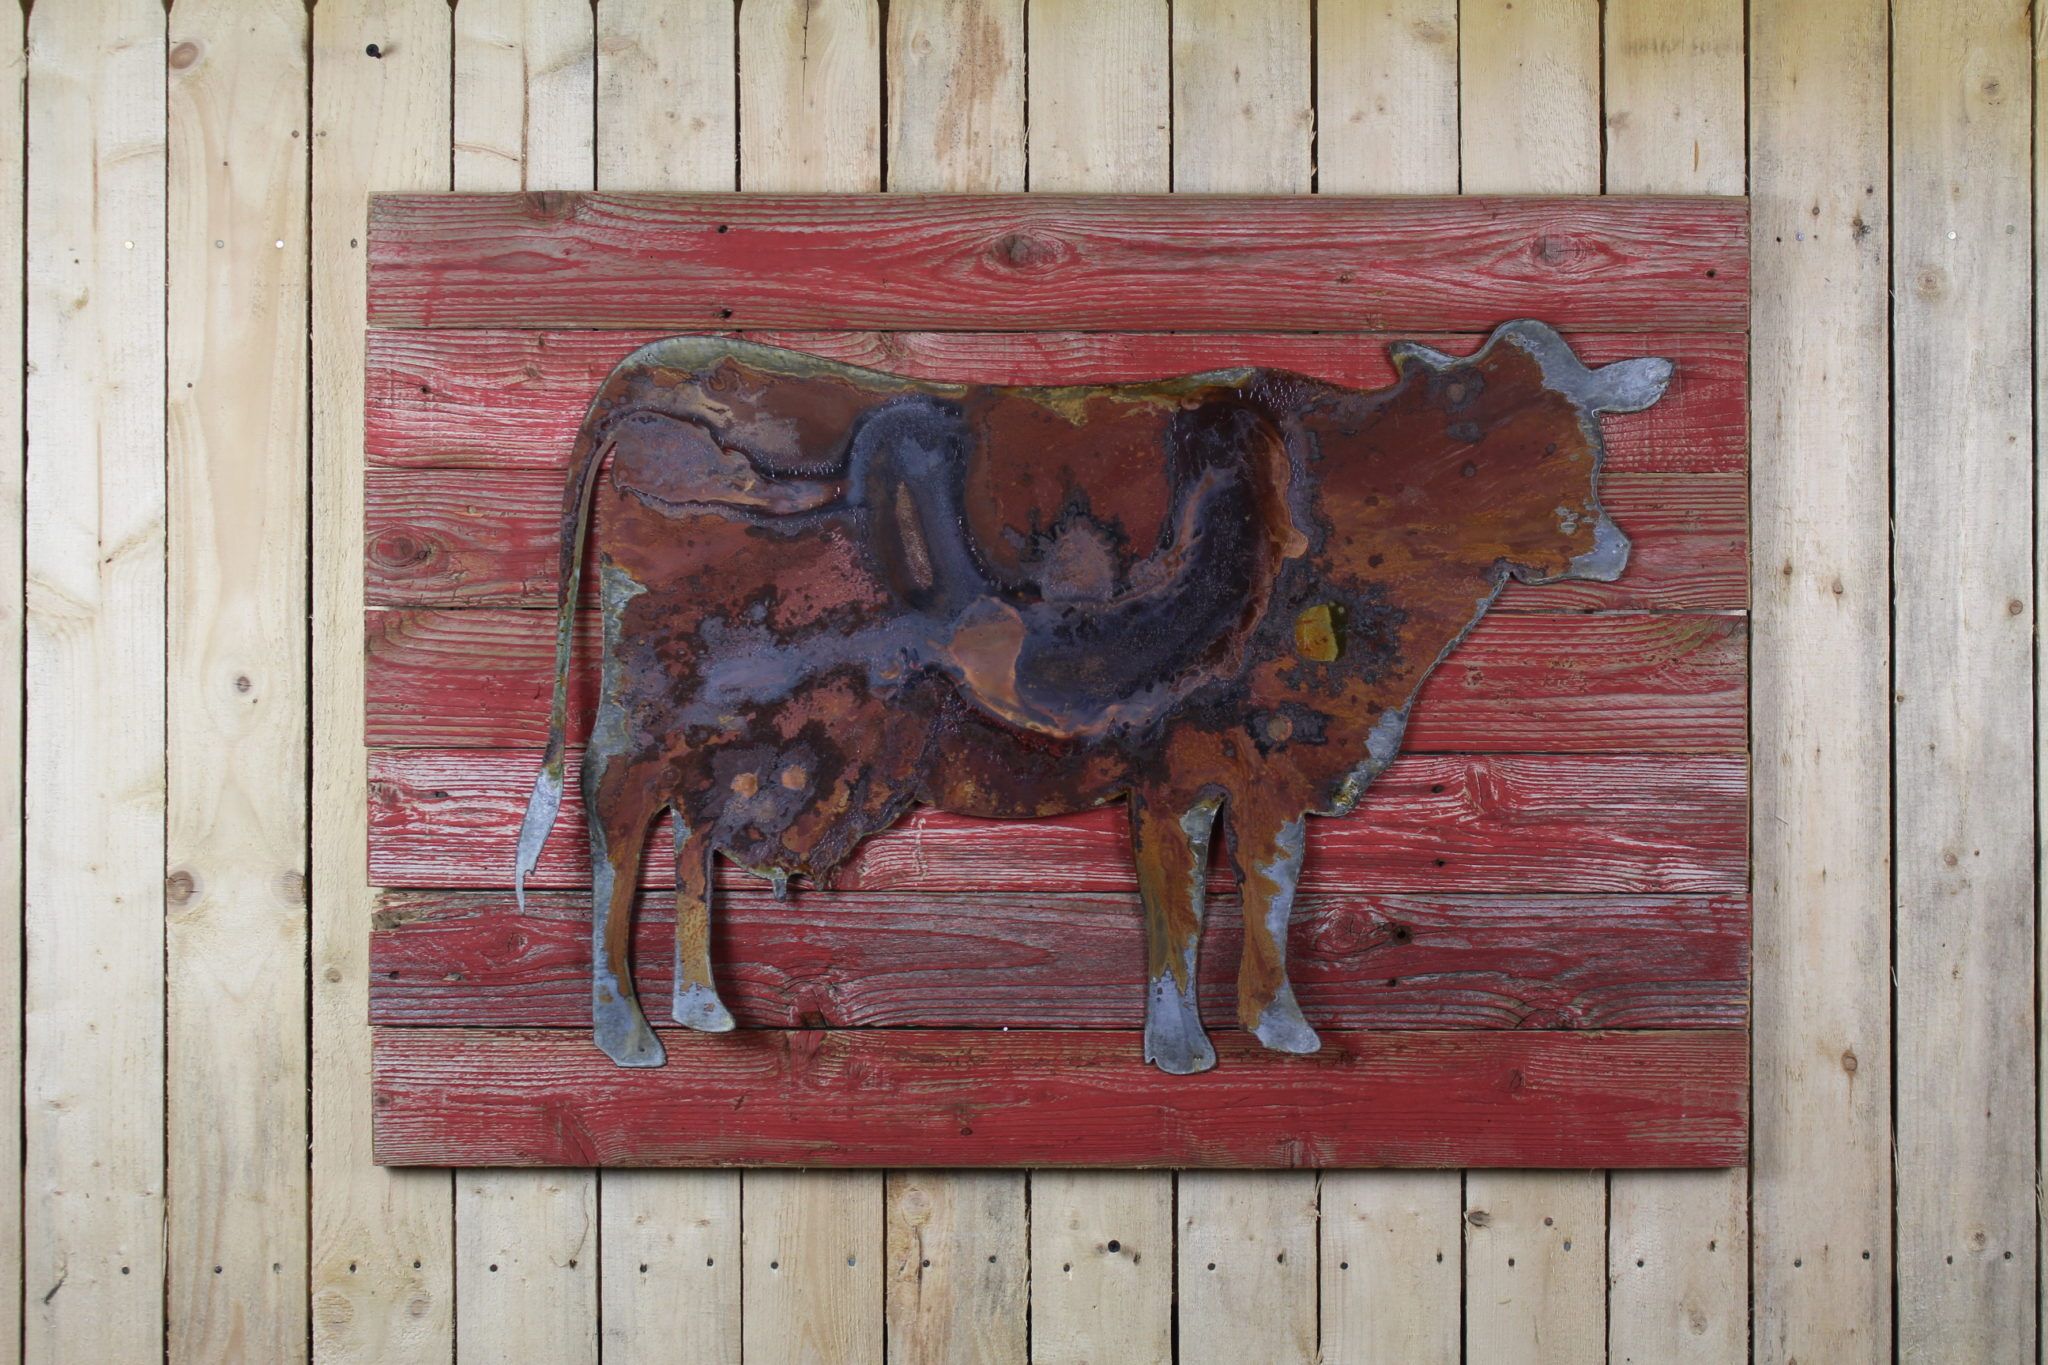 Cow On Wood Back – Rustic Metal Letters & Wall Art For Metallic Rugged Wooden Wall Art (View 9 of 15)